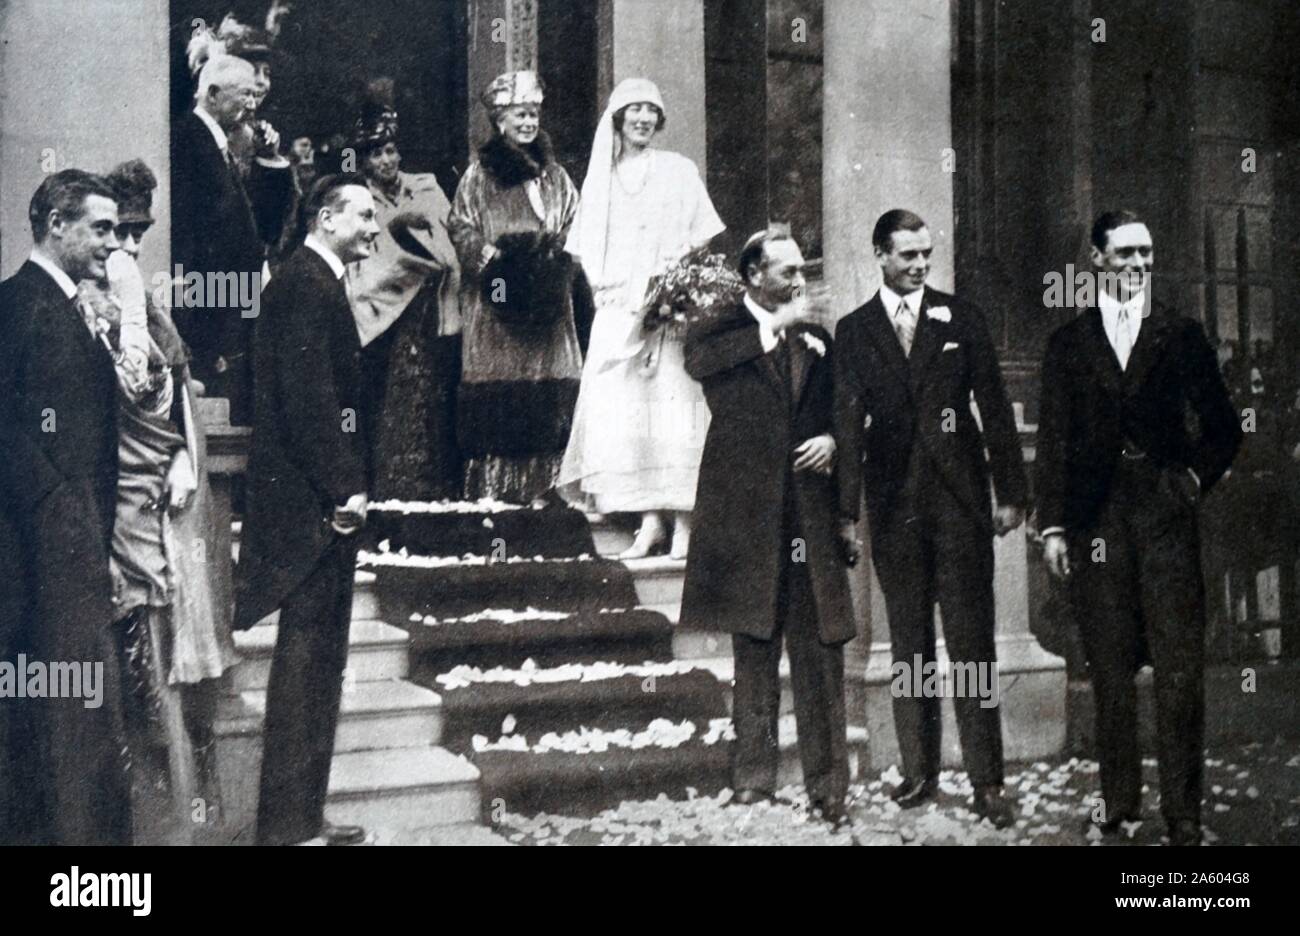 Photograph taken during the wedding of Maud of Wales (1869-1938) and King Haakon VII (1872-1957). Also pictured is King George V (1865-1936), Queen Elizabeth The Queen Mother (1900-2002), Alexandra of Denmark (1844-1925) and Queen Mary of Teck (1867-1953). Dated 20th Century Stock Photo